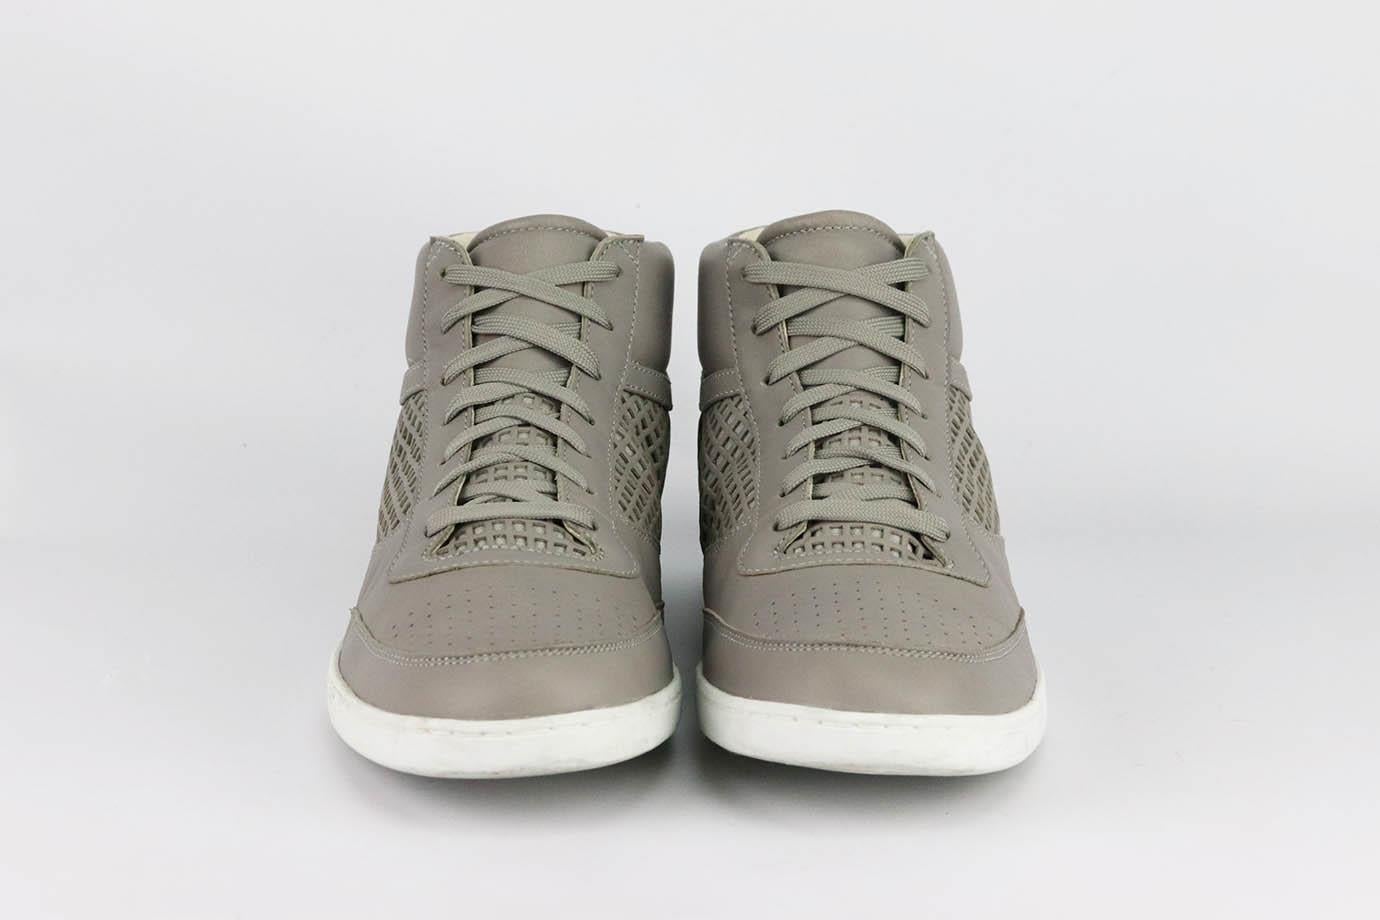 These high-top sneakers by Dolce & Gabbana is just as cool as the last - they're made from breathable leather and have padded collars and embossed logo on the back. Rubber sole measures approximately 25 mm/ 1 inches. Grey leather. Lace up fastening